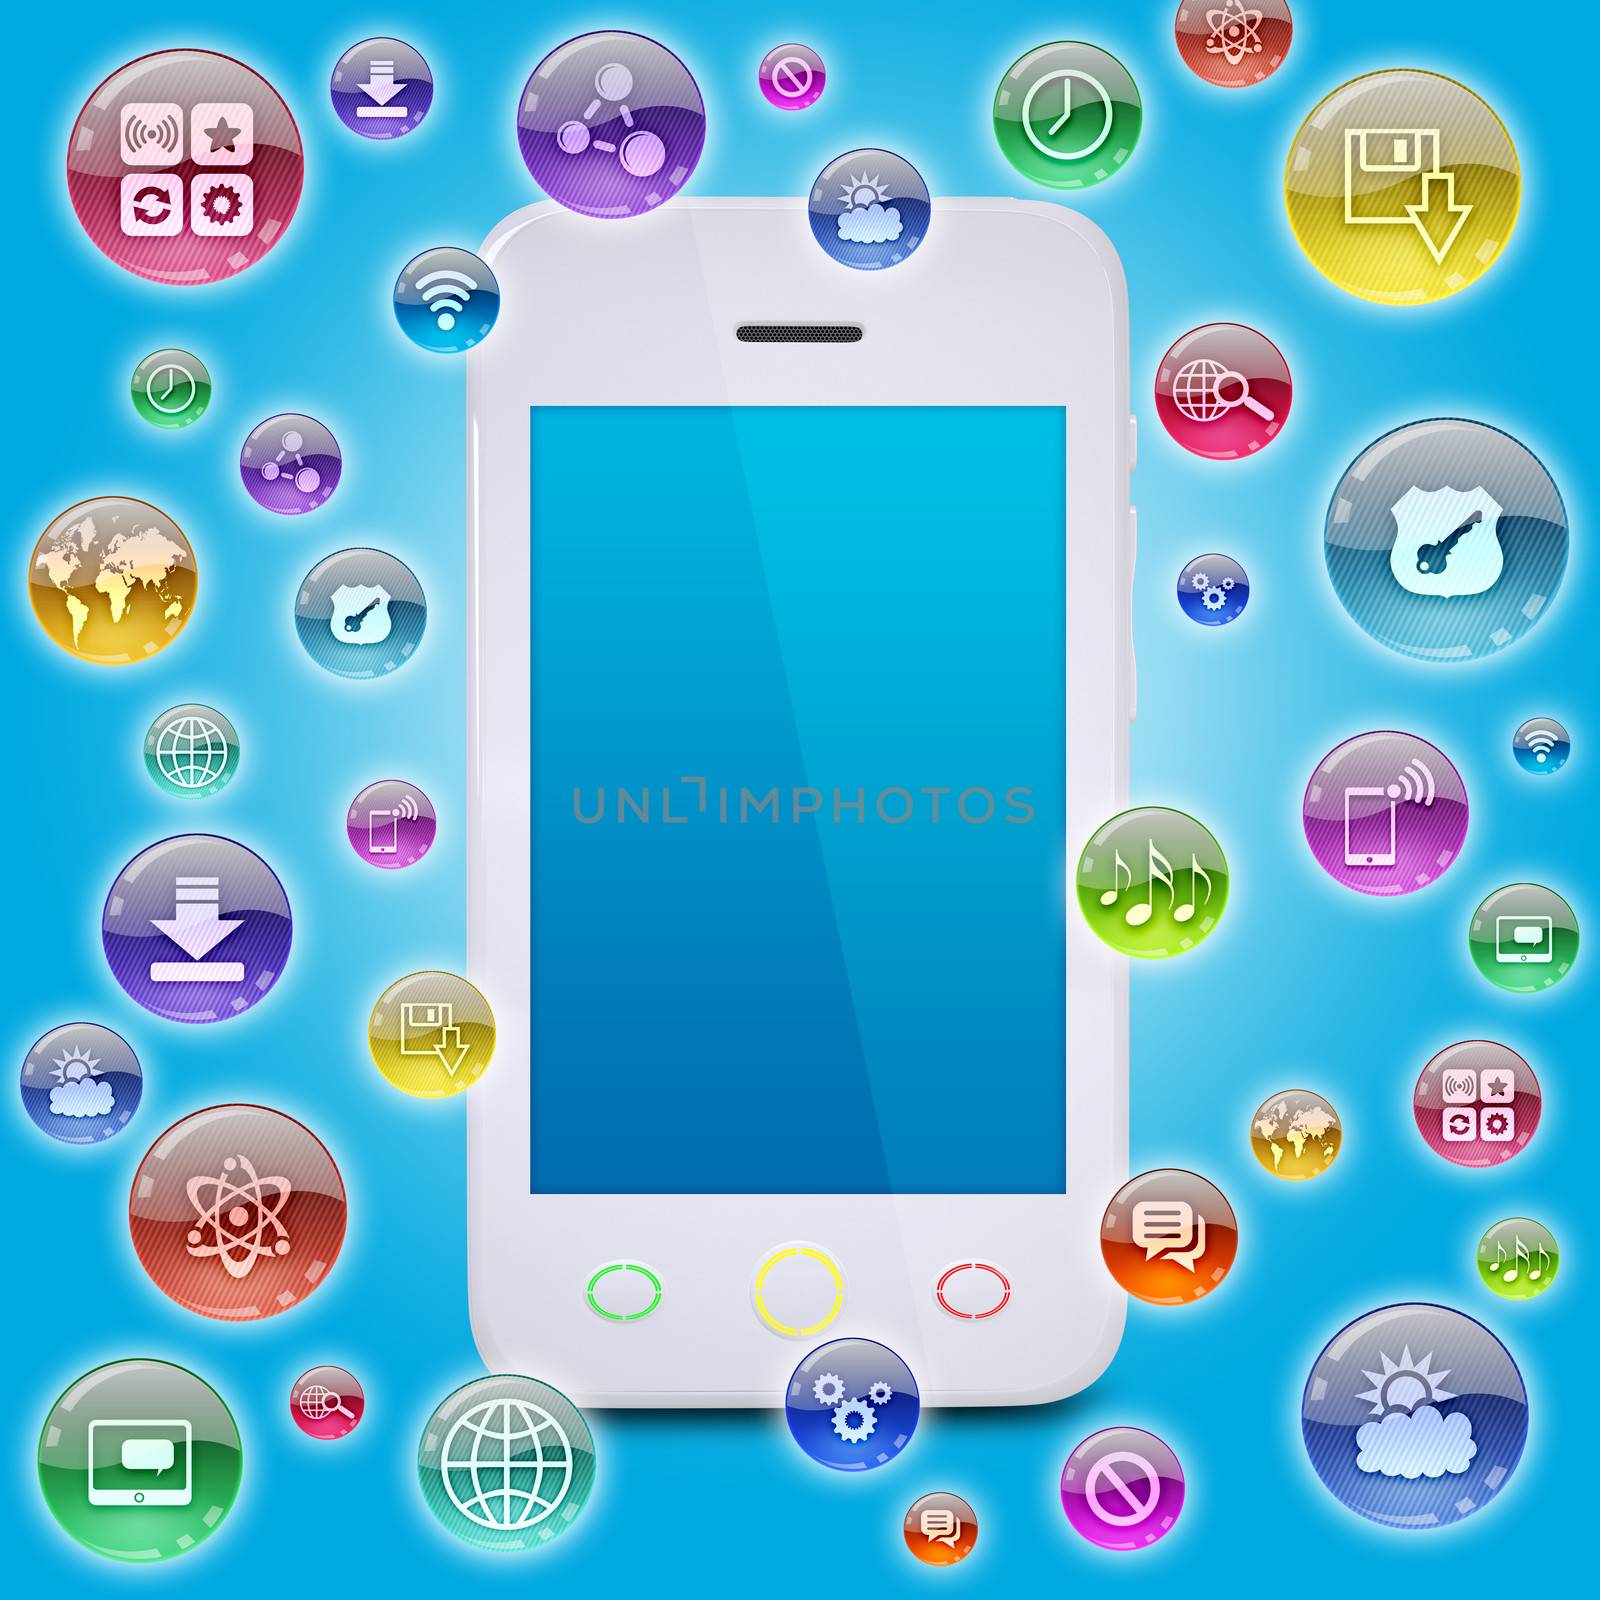 Smartphone and application icons. The concept of software